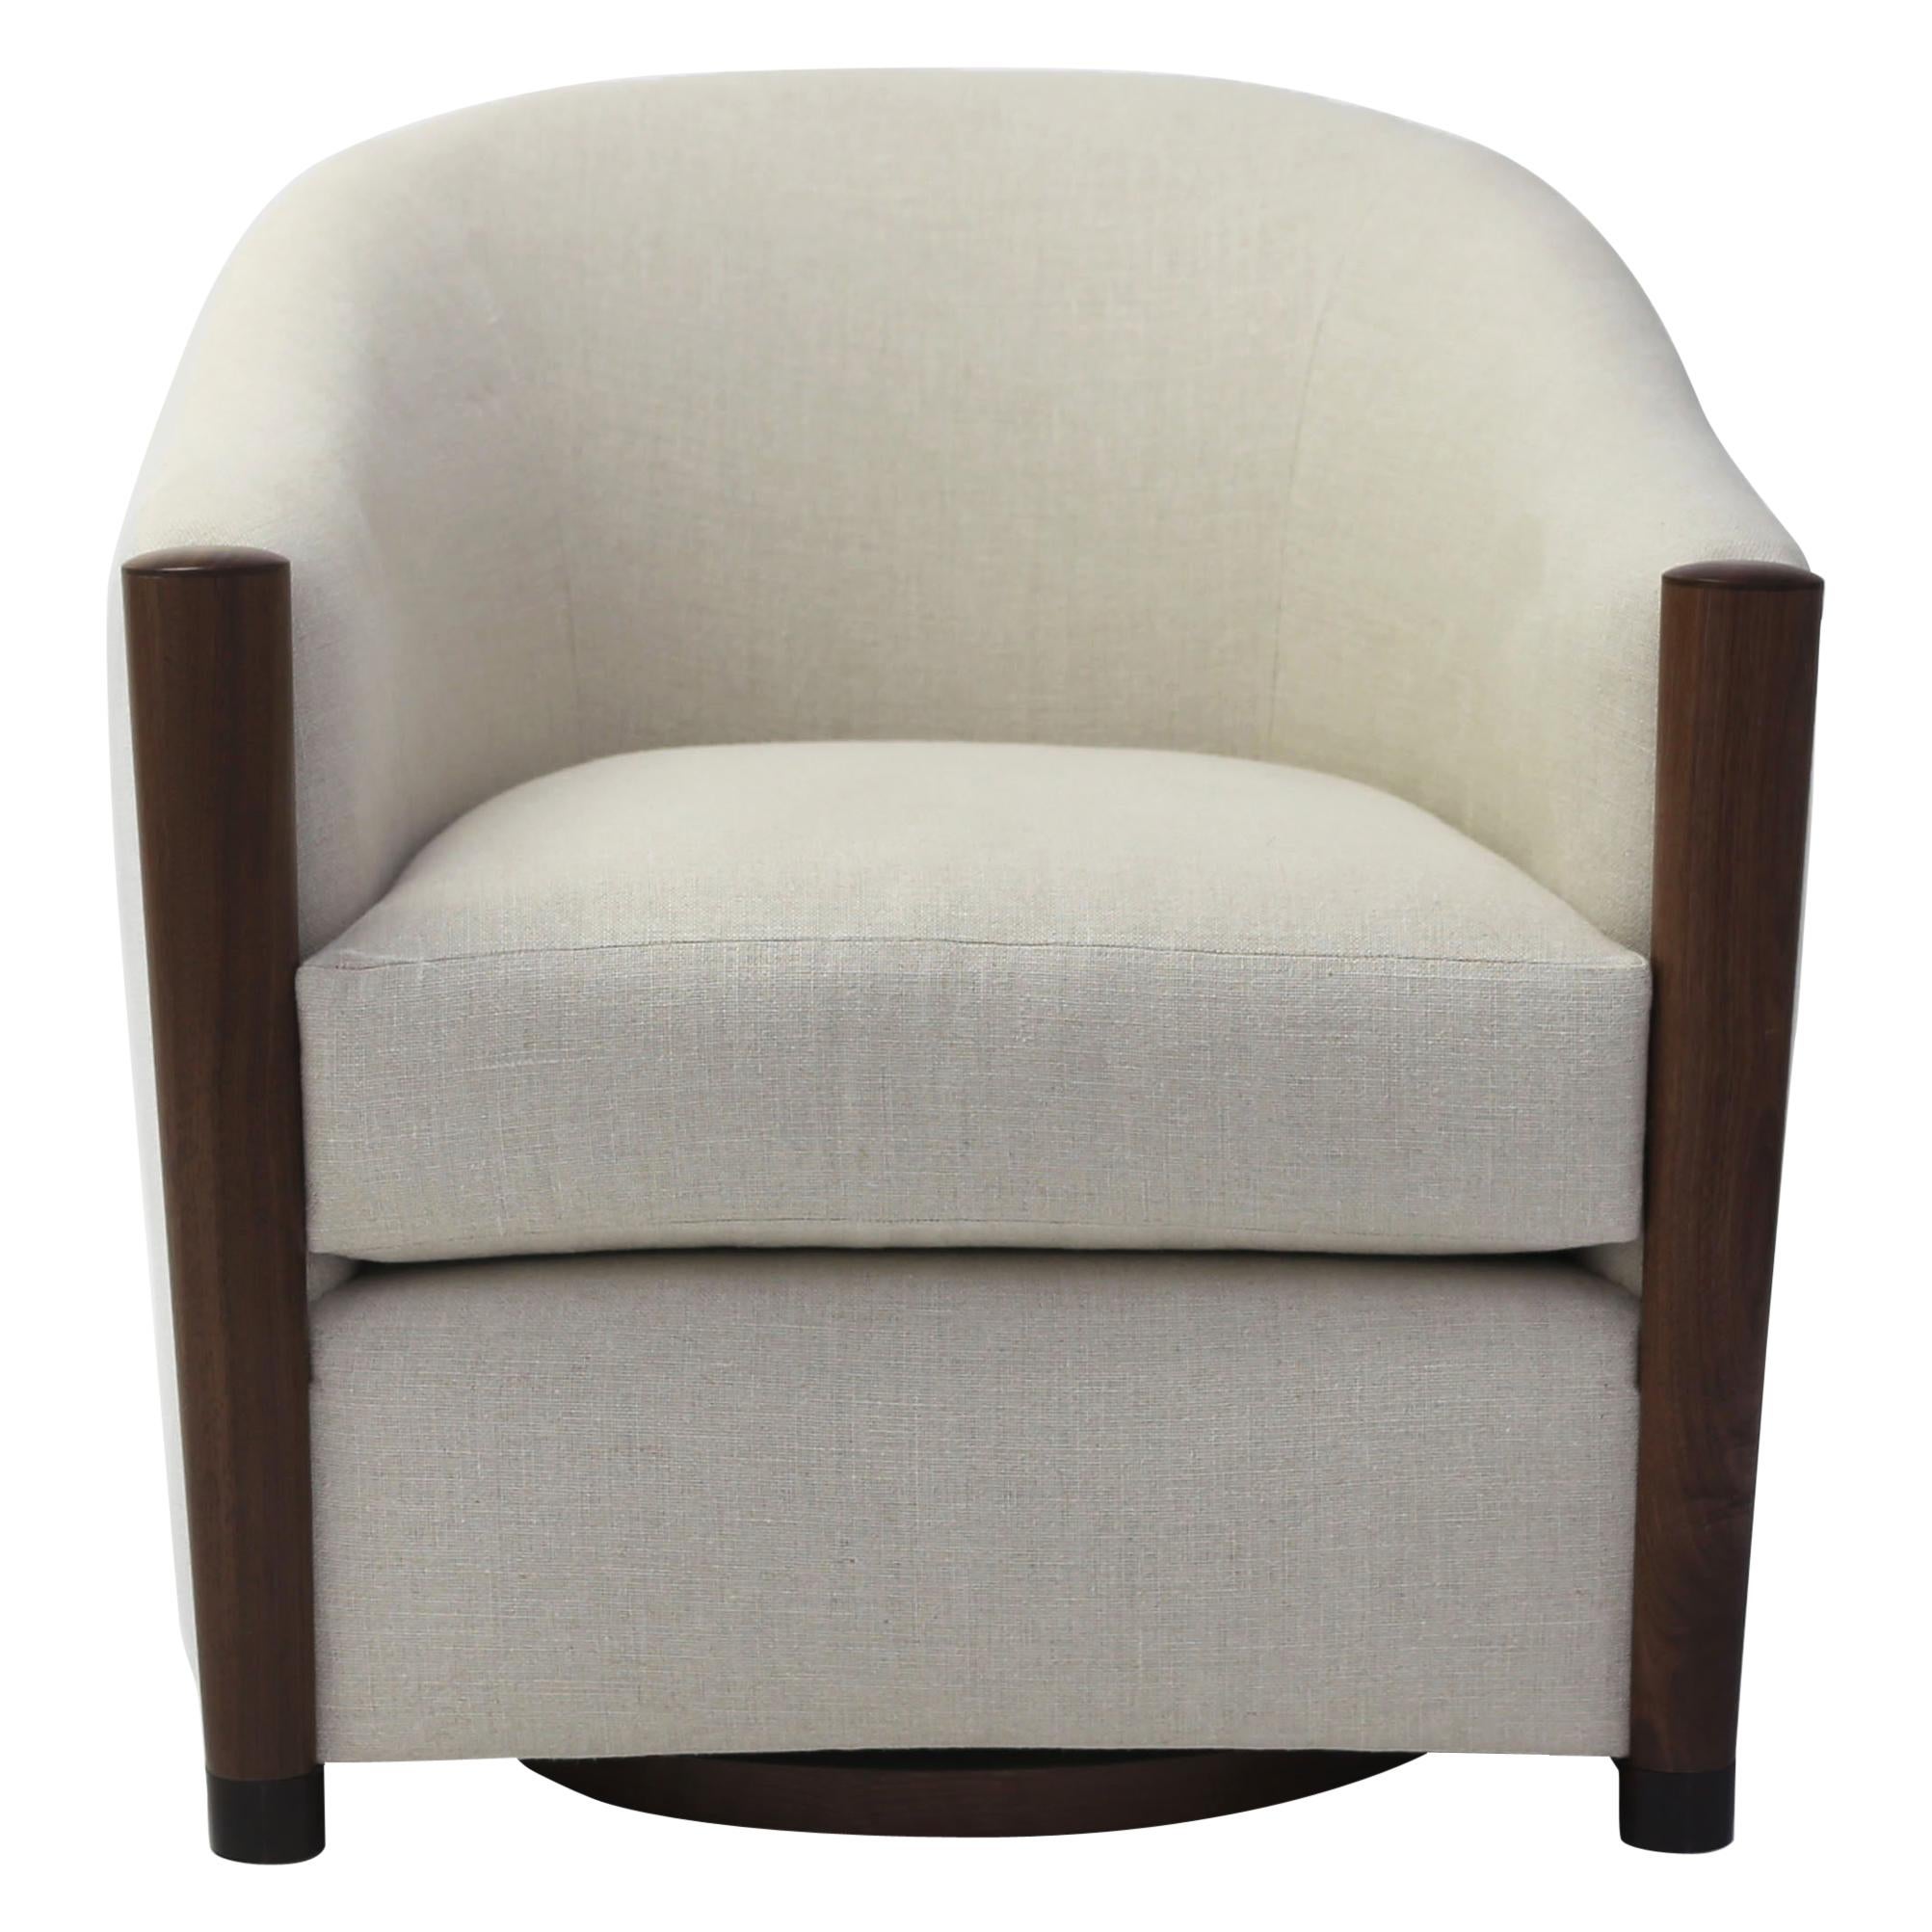 Rounded Tub Club Chair on Swivel Shown in Linen Fabric with Wood Arm Post Detail